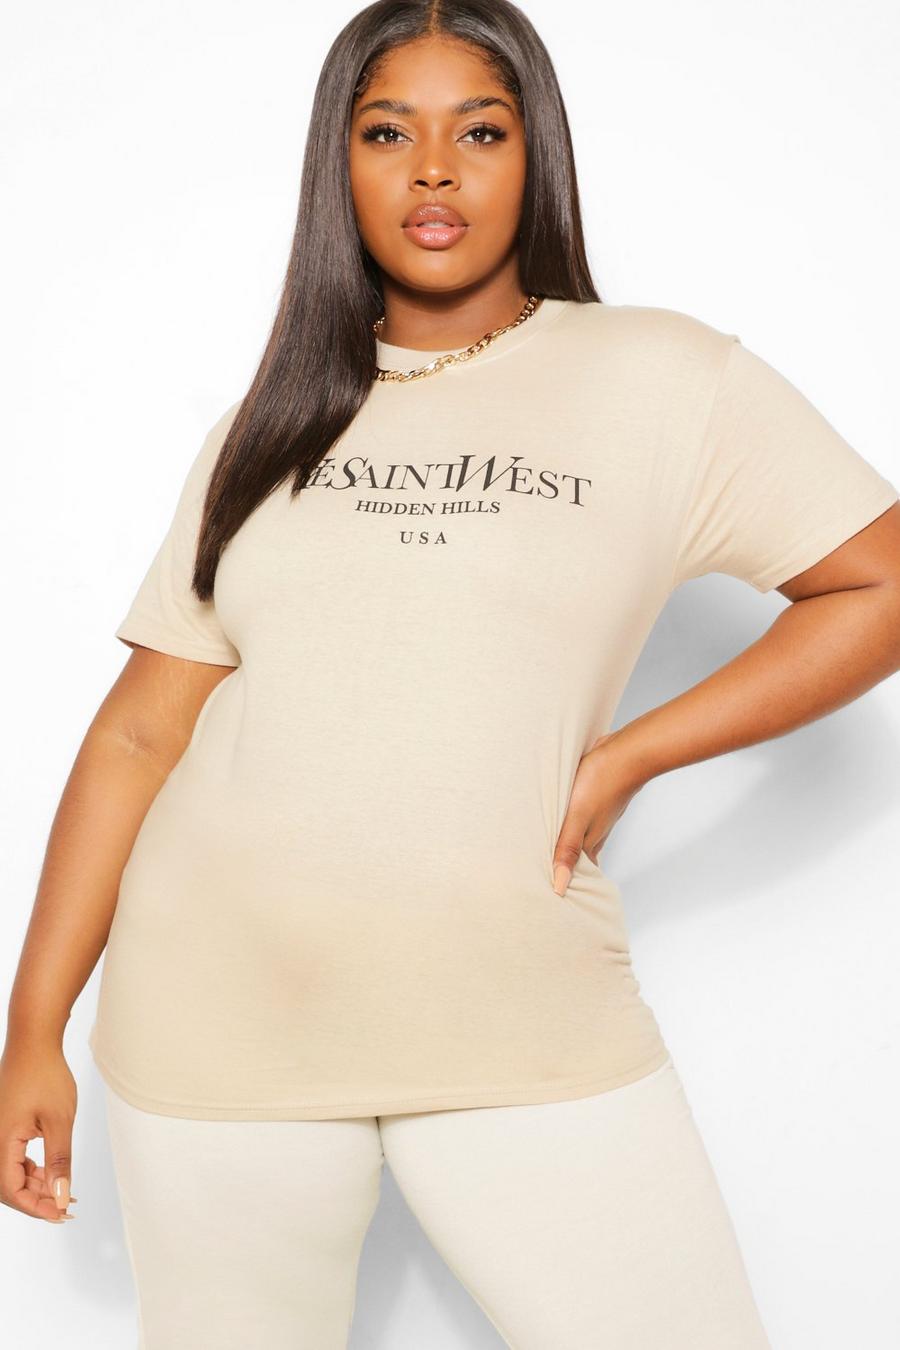 Grande taille - T-shirt "Ye Saint West", Stone image number 1